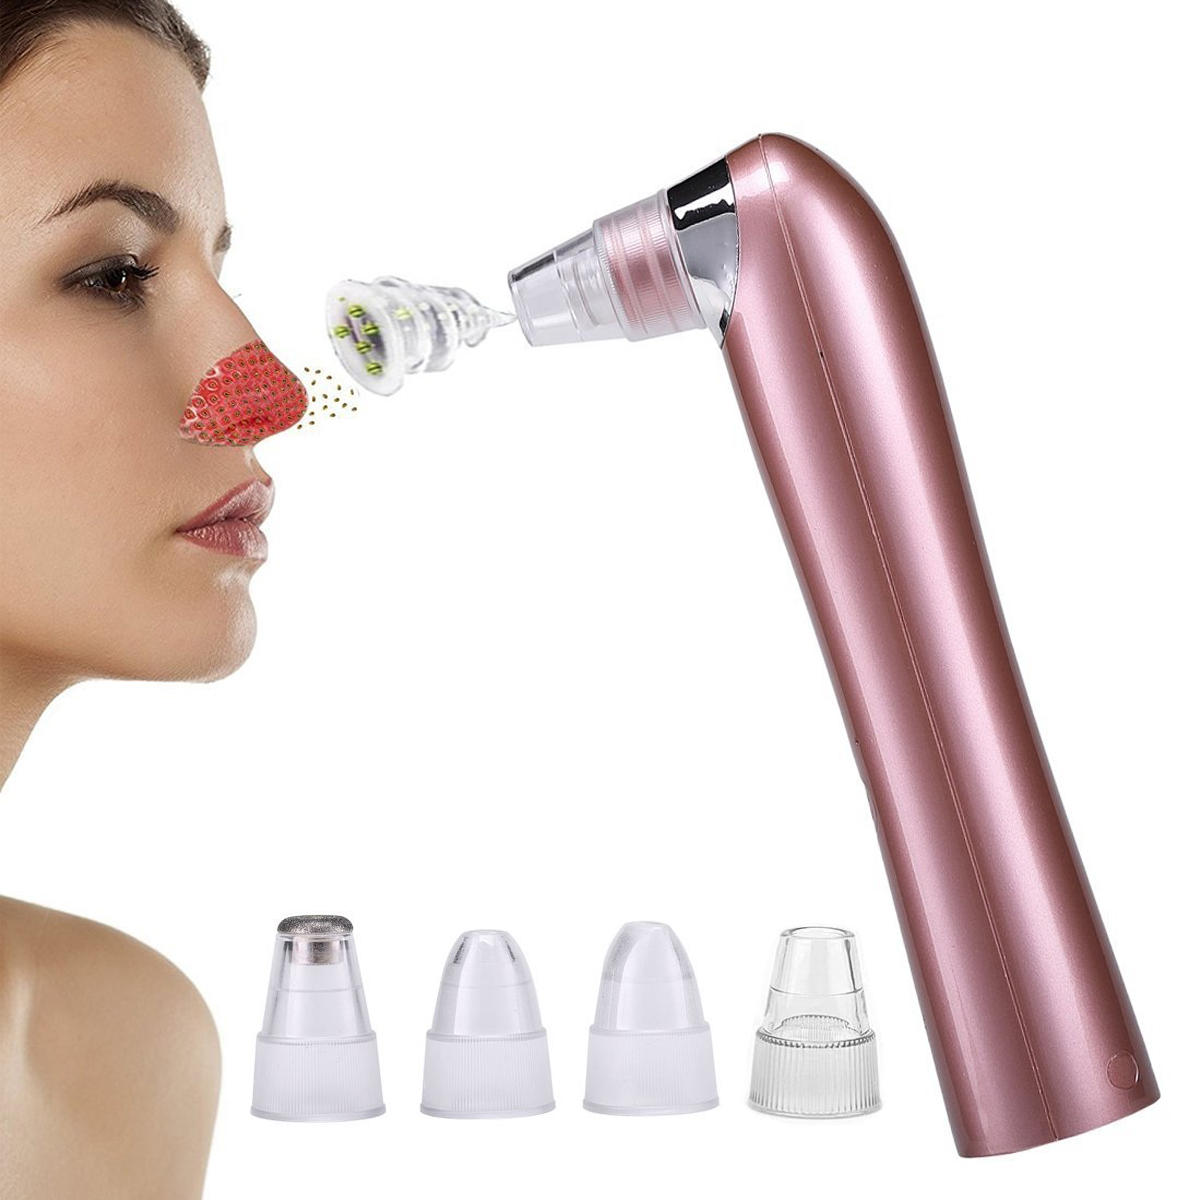 Rechargeable Blackhead Suction Tool Microdermabras Acne Remover Pore Cleanser